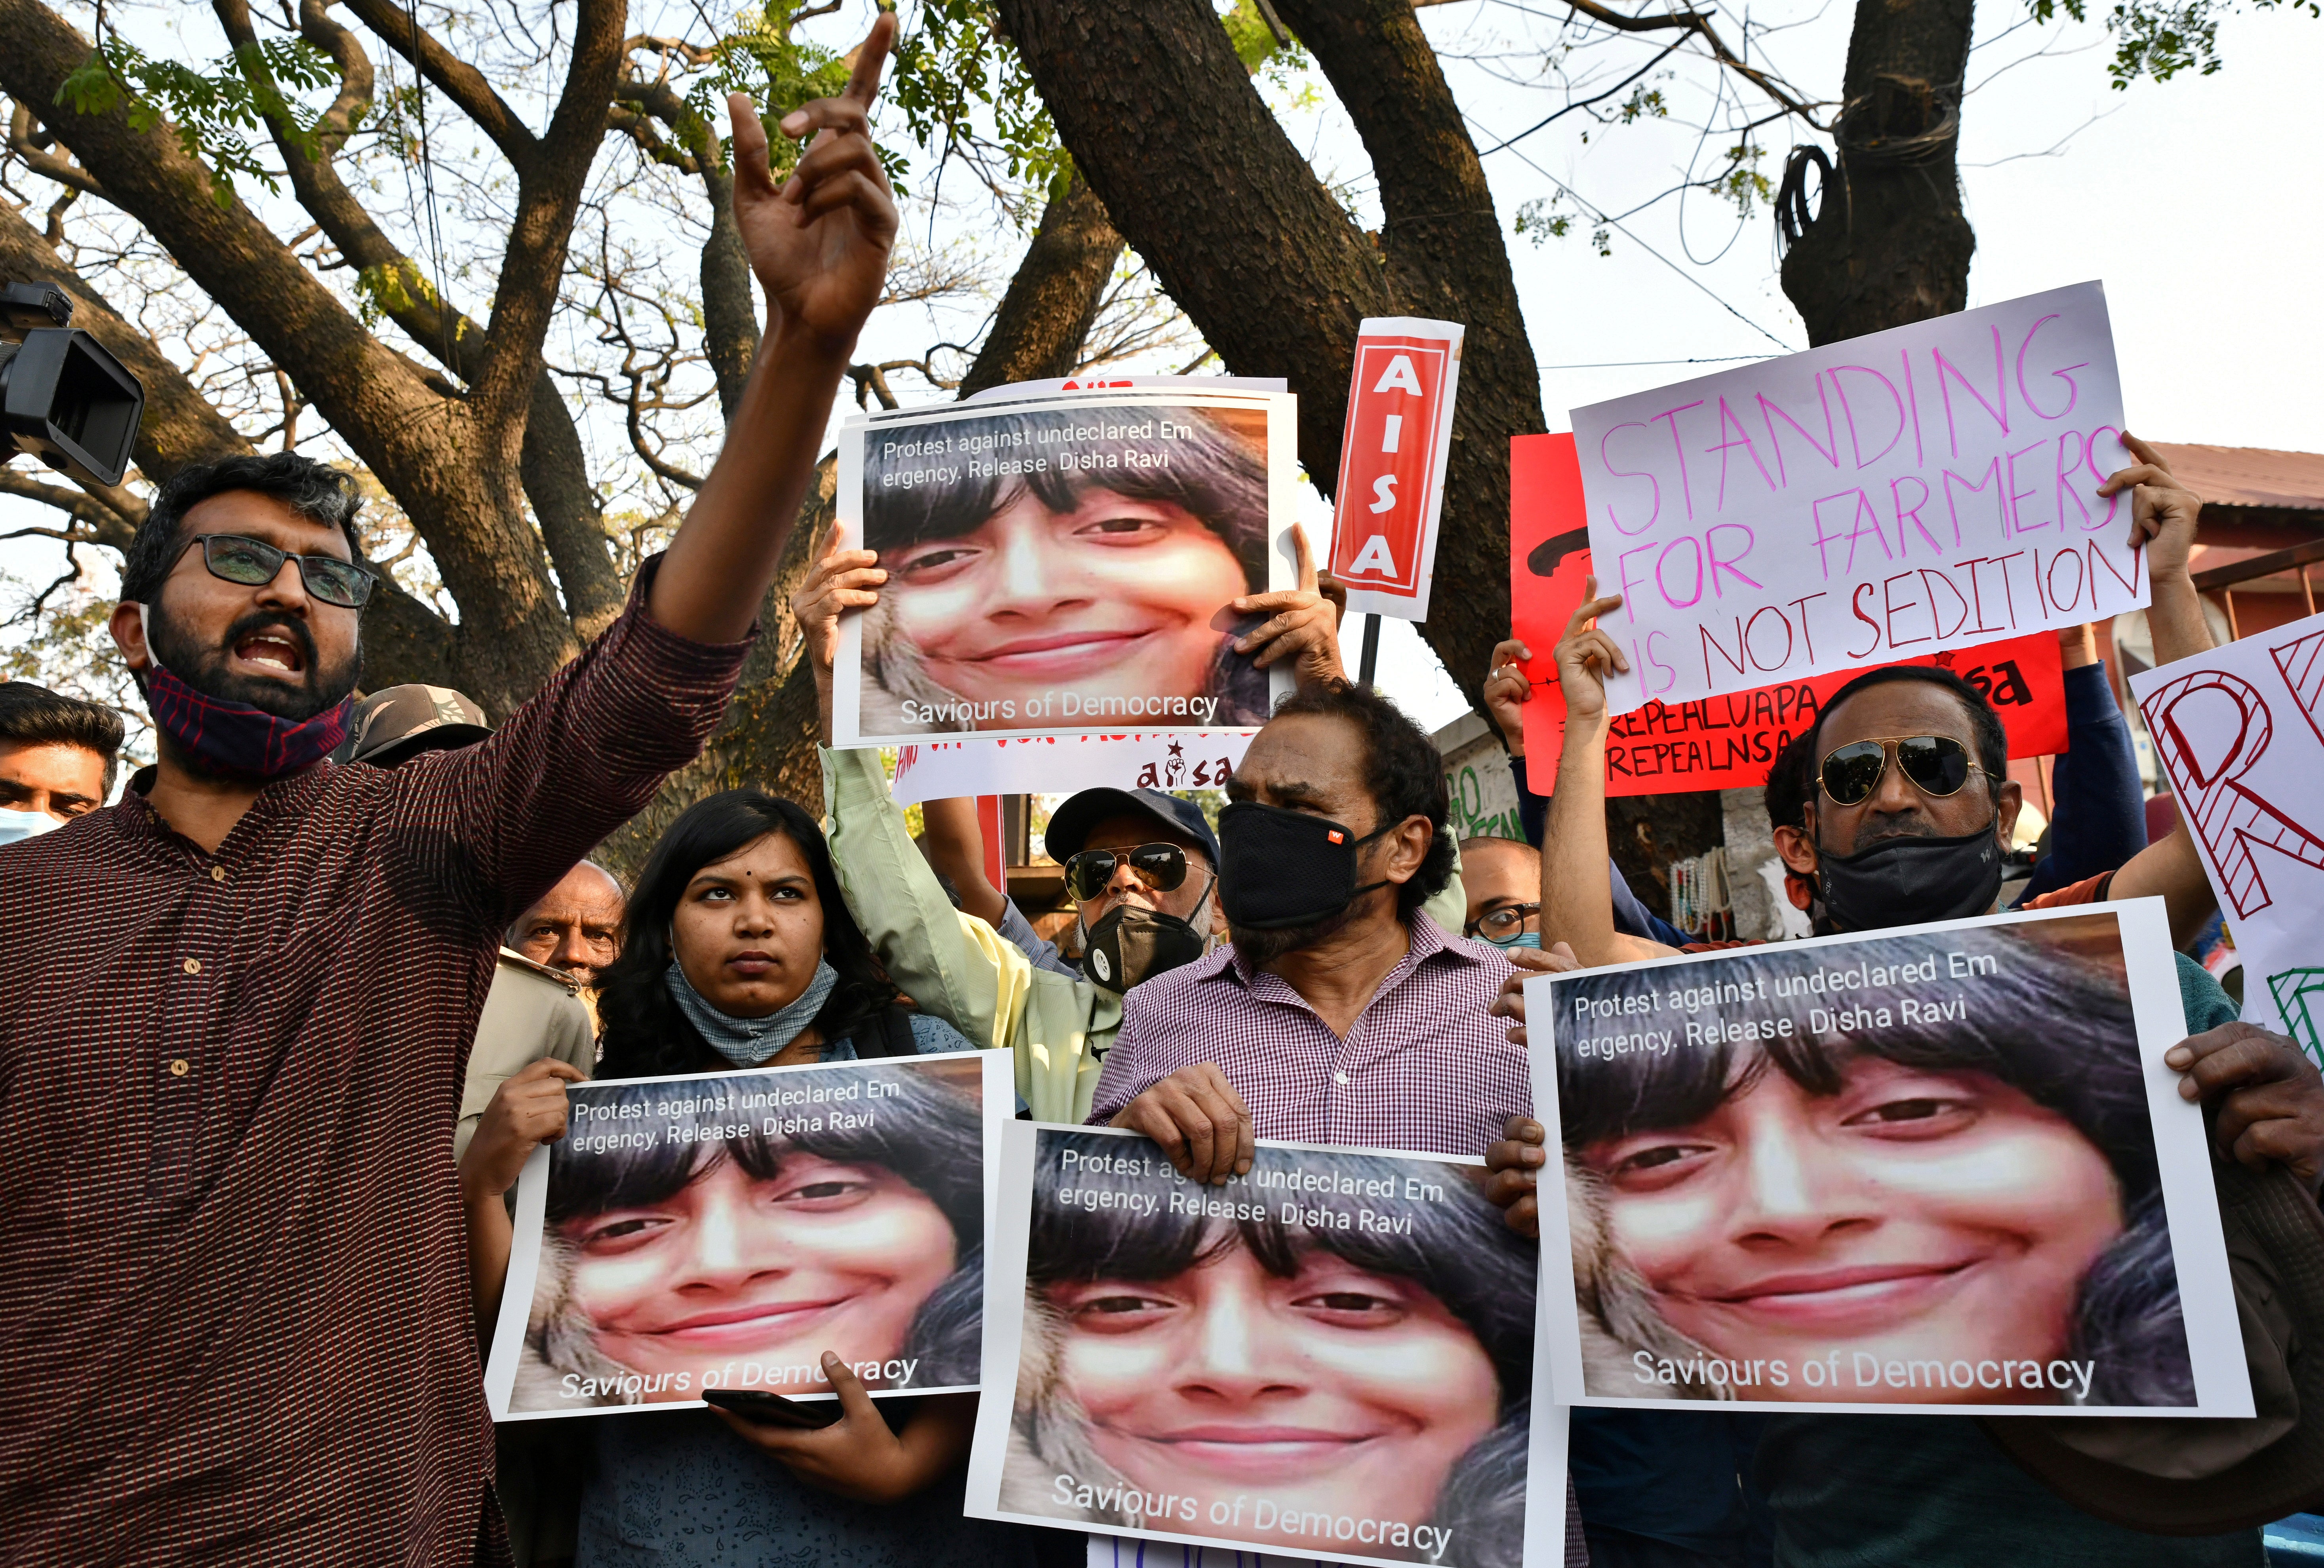 Several people hit the streets in Bangaluru city, India to protest against the arrest of climate activist Disha Ravi on 15 February